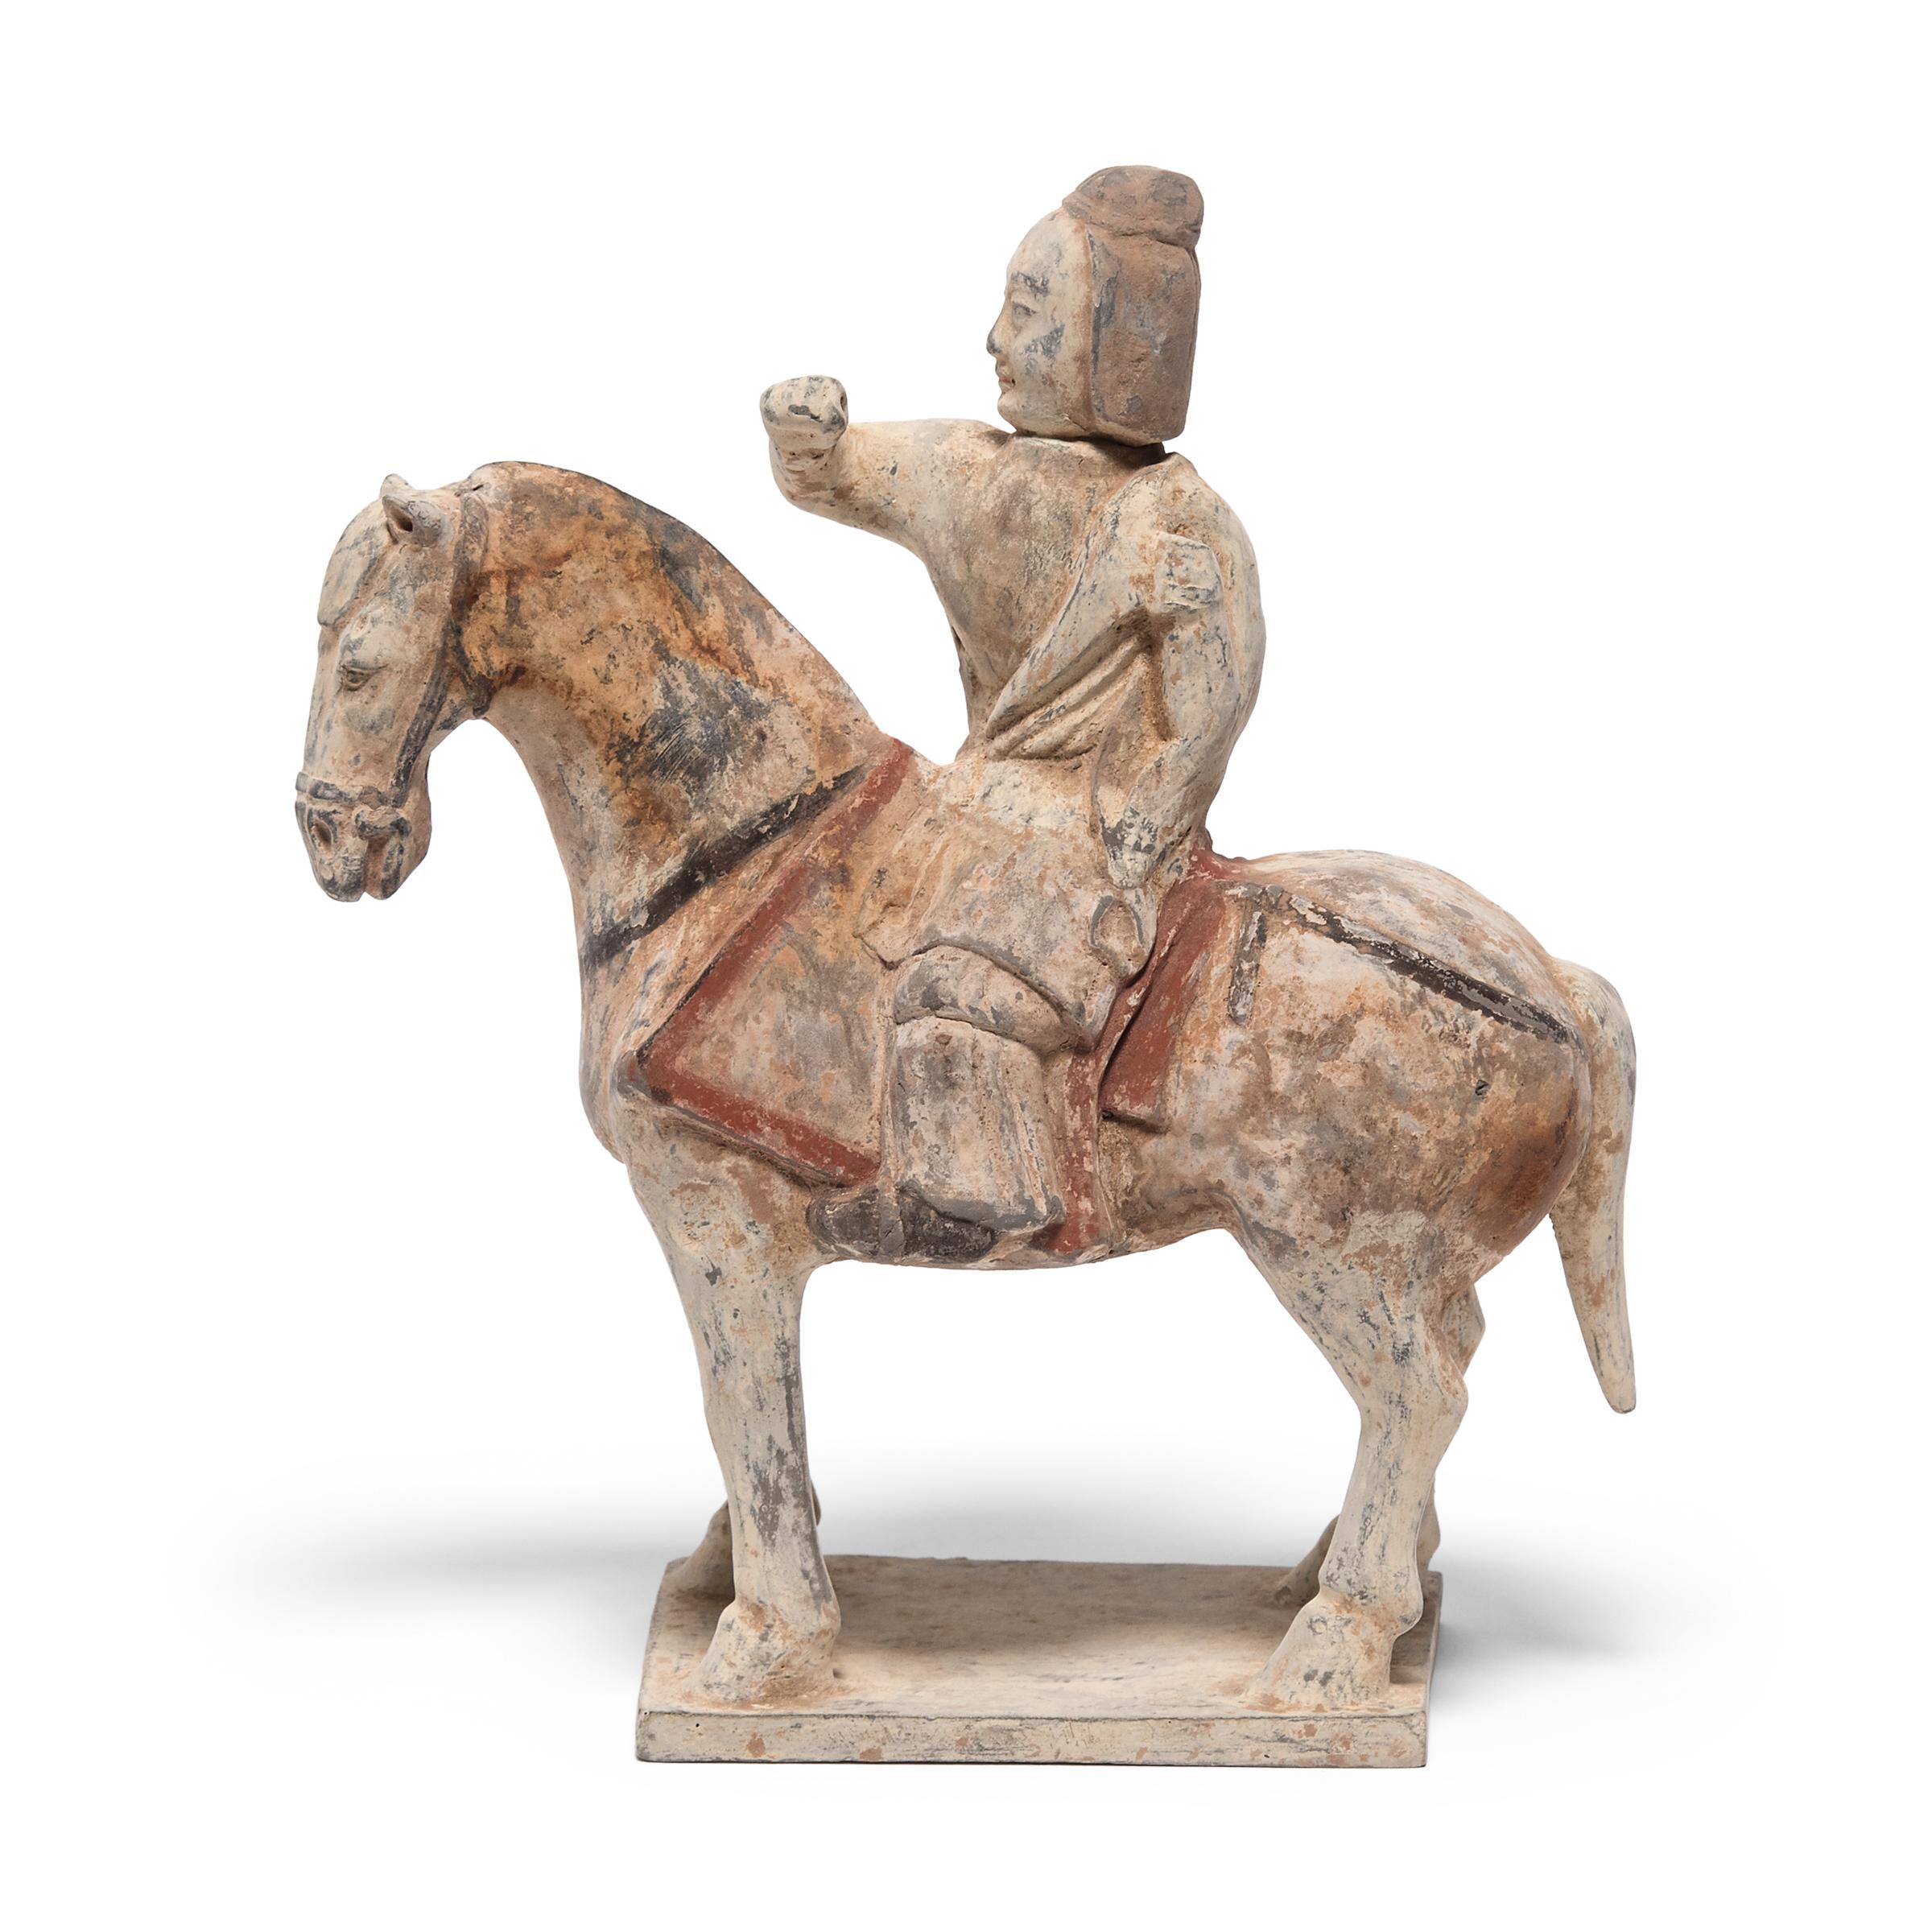 This dignified equestrian is a soldier from the Northern Qi dynasty, and was sculpted in Shandong province over 1,500 years ago as a míngqì burial figure for a wealthy nobleman. Depicting the pleasures of daily life, míngqì figurines were offerings